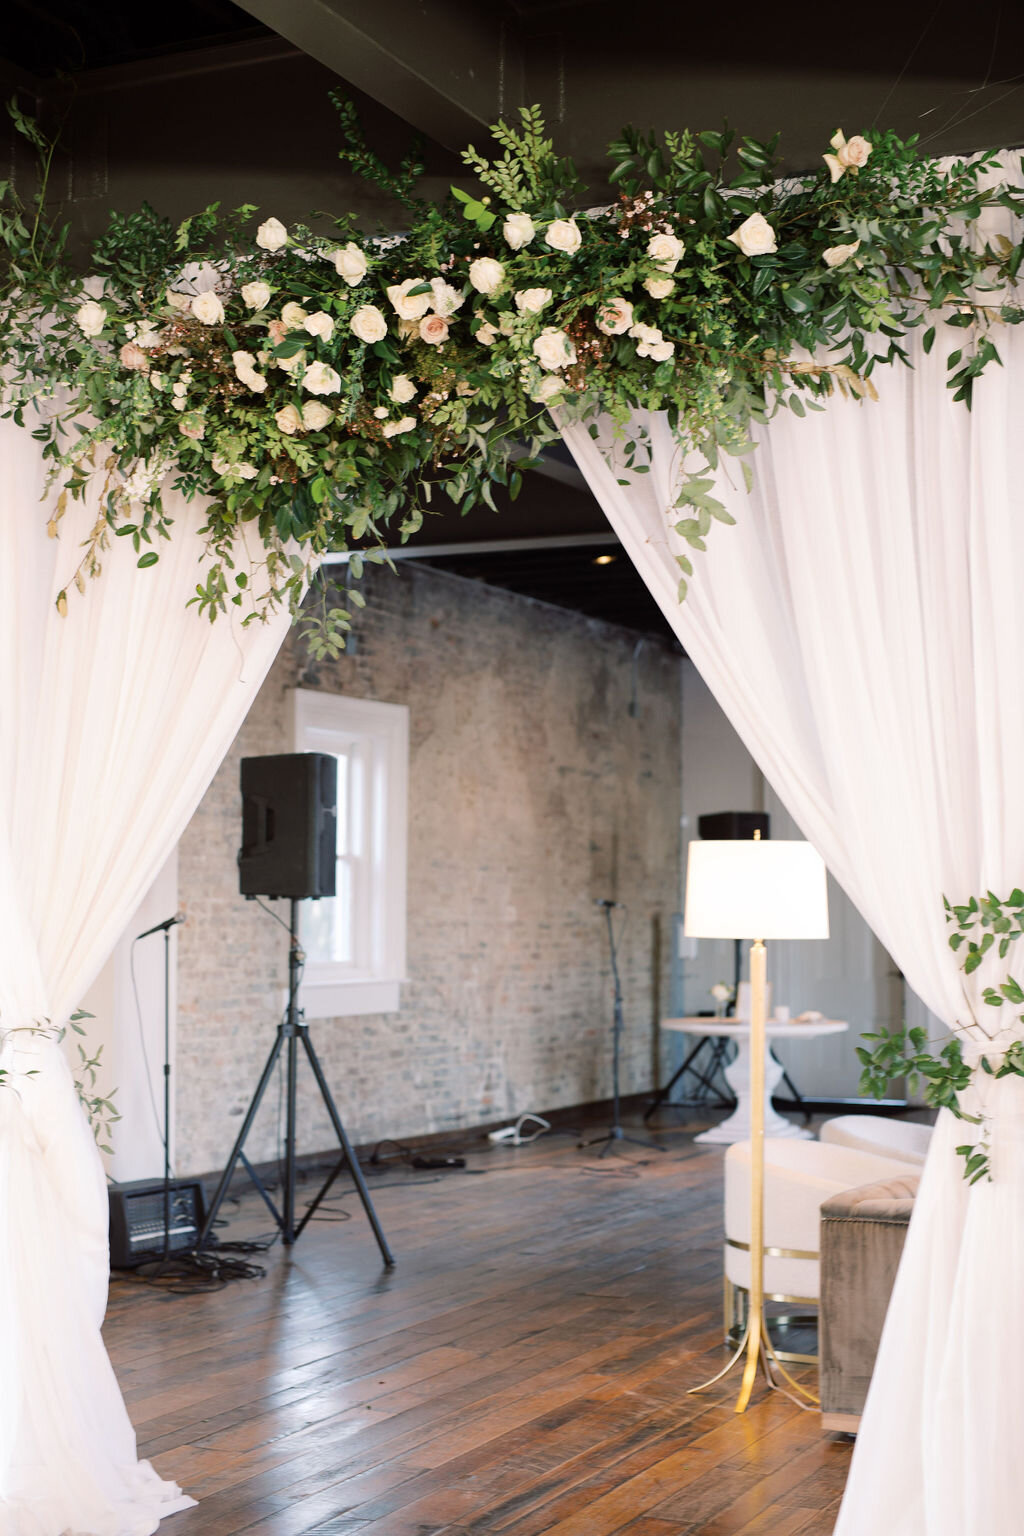 A growing installation of blush and ivory garden roses, white ranunculus, creamy spray roses, delicate eriostemon and lush greenery separated the reception area from the lounge area at the Cordelle. Designed by florist Rosemary & Finch in Nashville,…